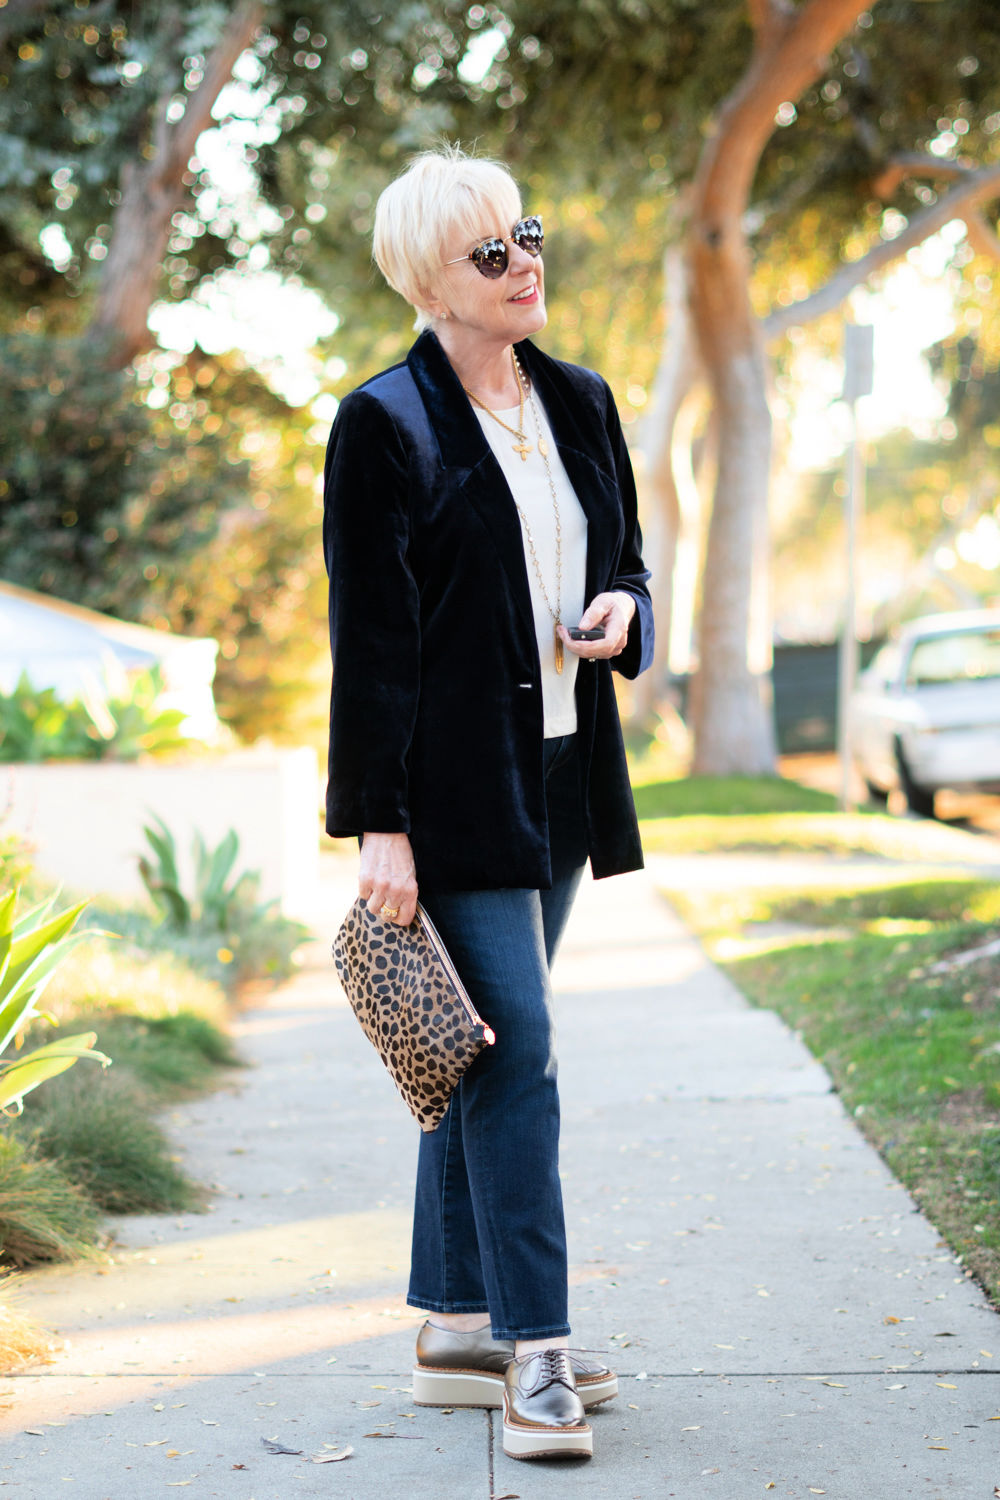 Festive Not Fussy: Casual Holiday Party Outfit With Jeans